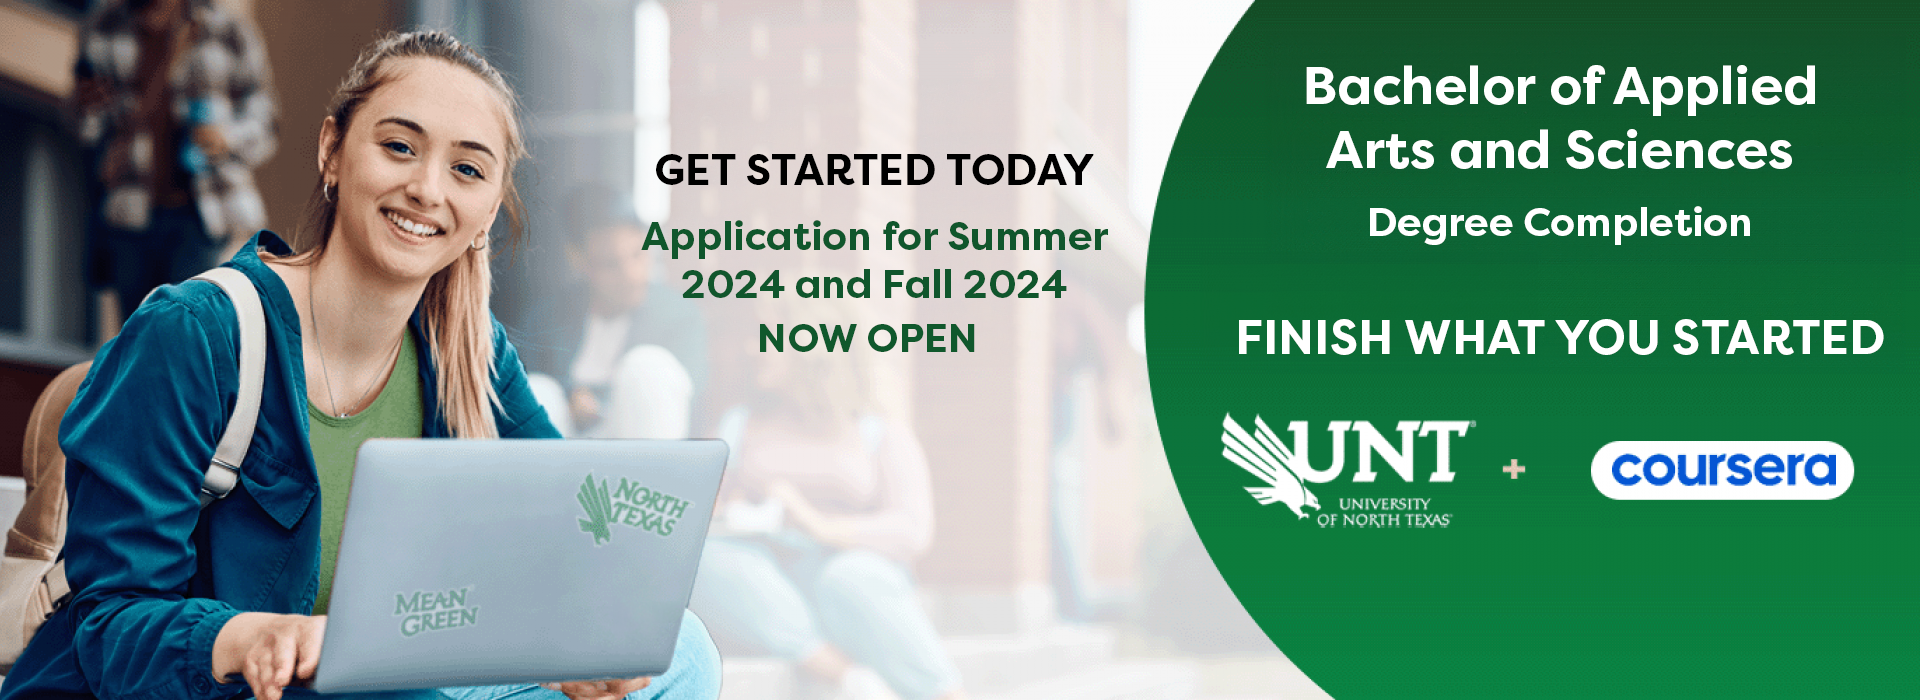 UNT Bachelor of Applied Science on Coursera, Applications for Spring 2024 now open